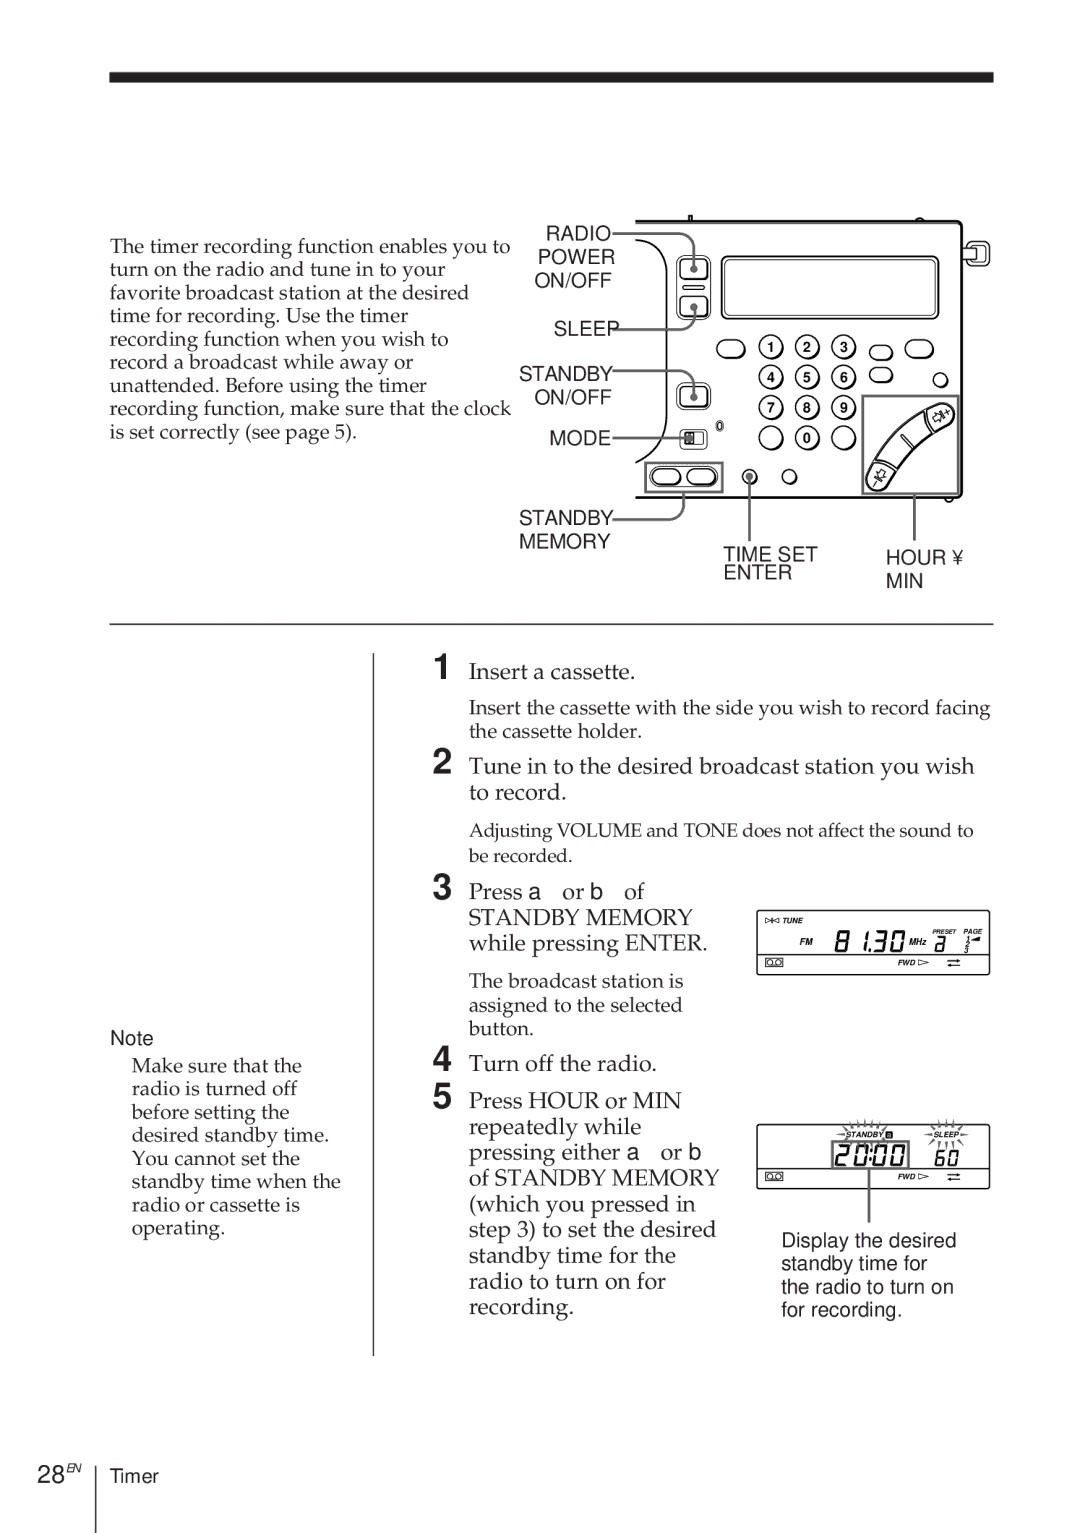 Sony ICF-SW1000TS operating instructions To record the desired broadcast with, Timer-Timer recording, 28EN 